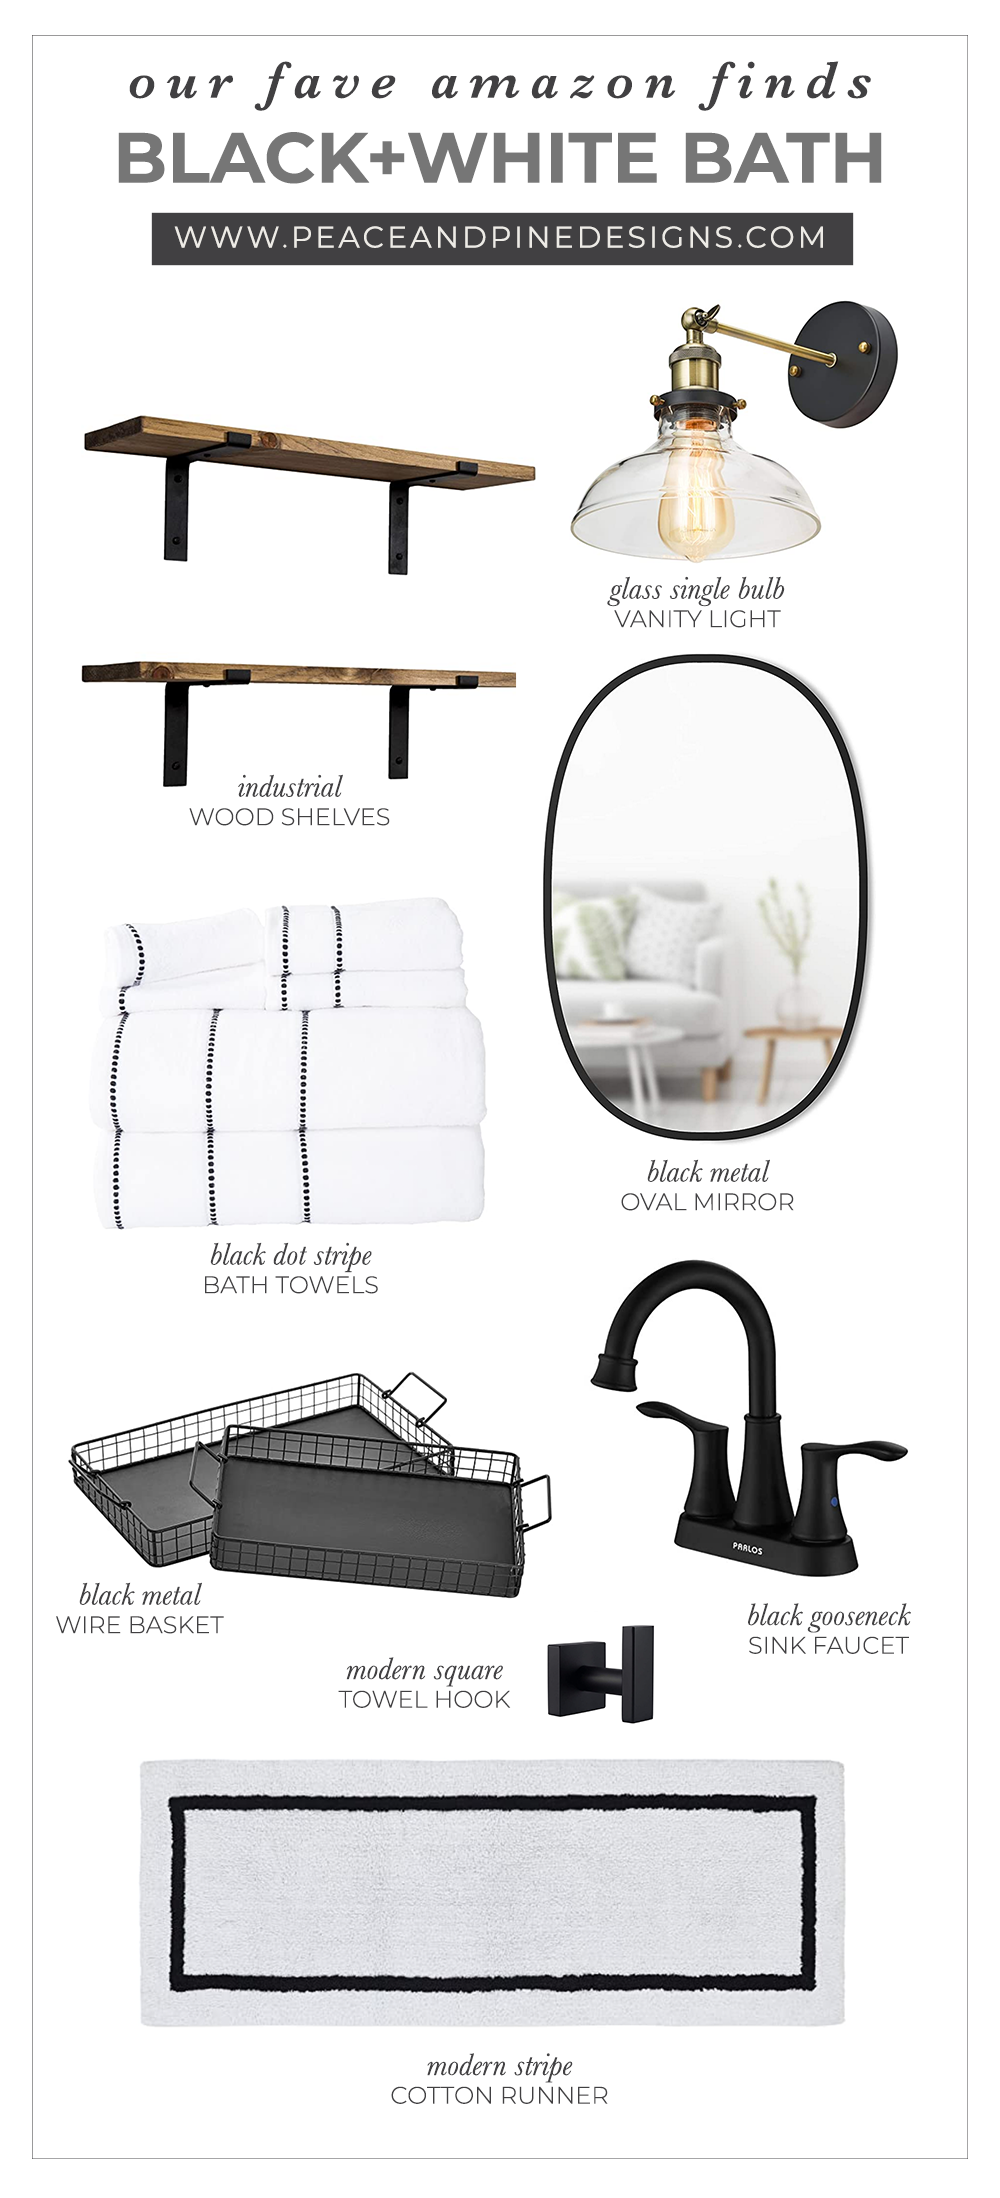 BLACK AND WHITE AMAZON BATHROOM FINDS